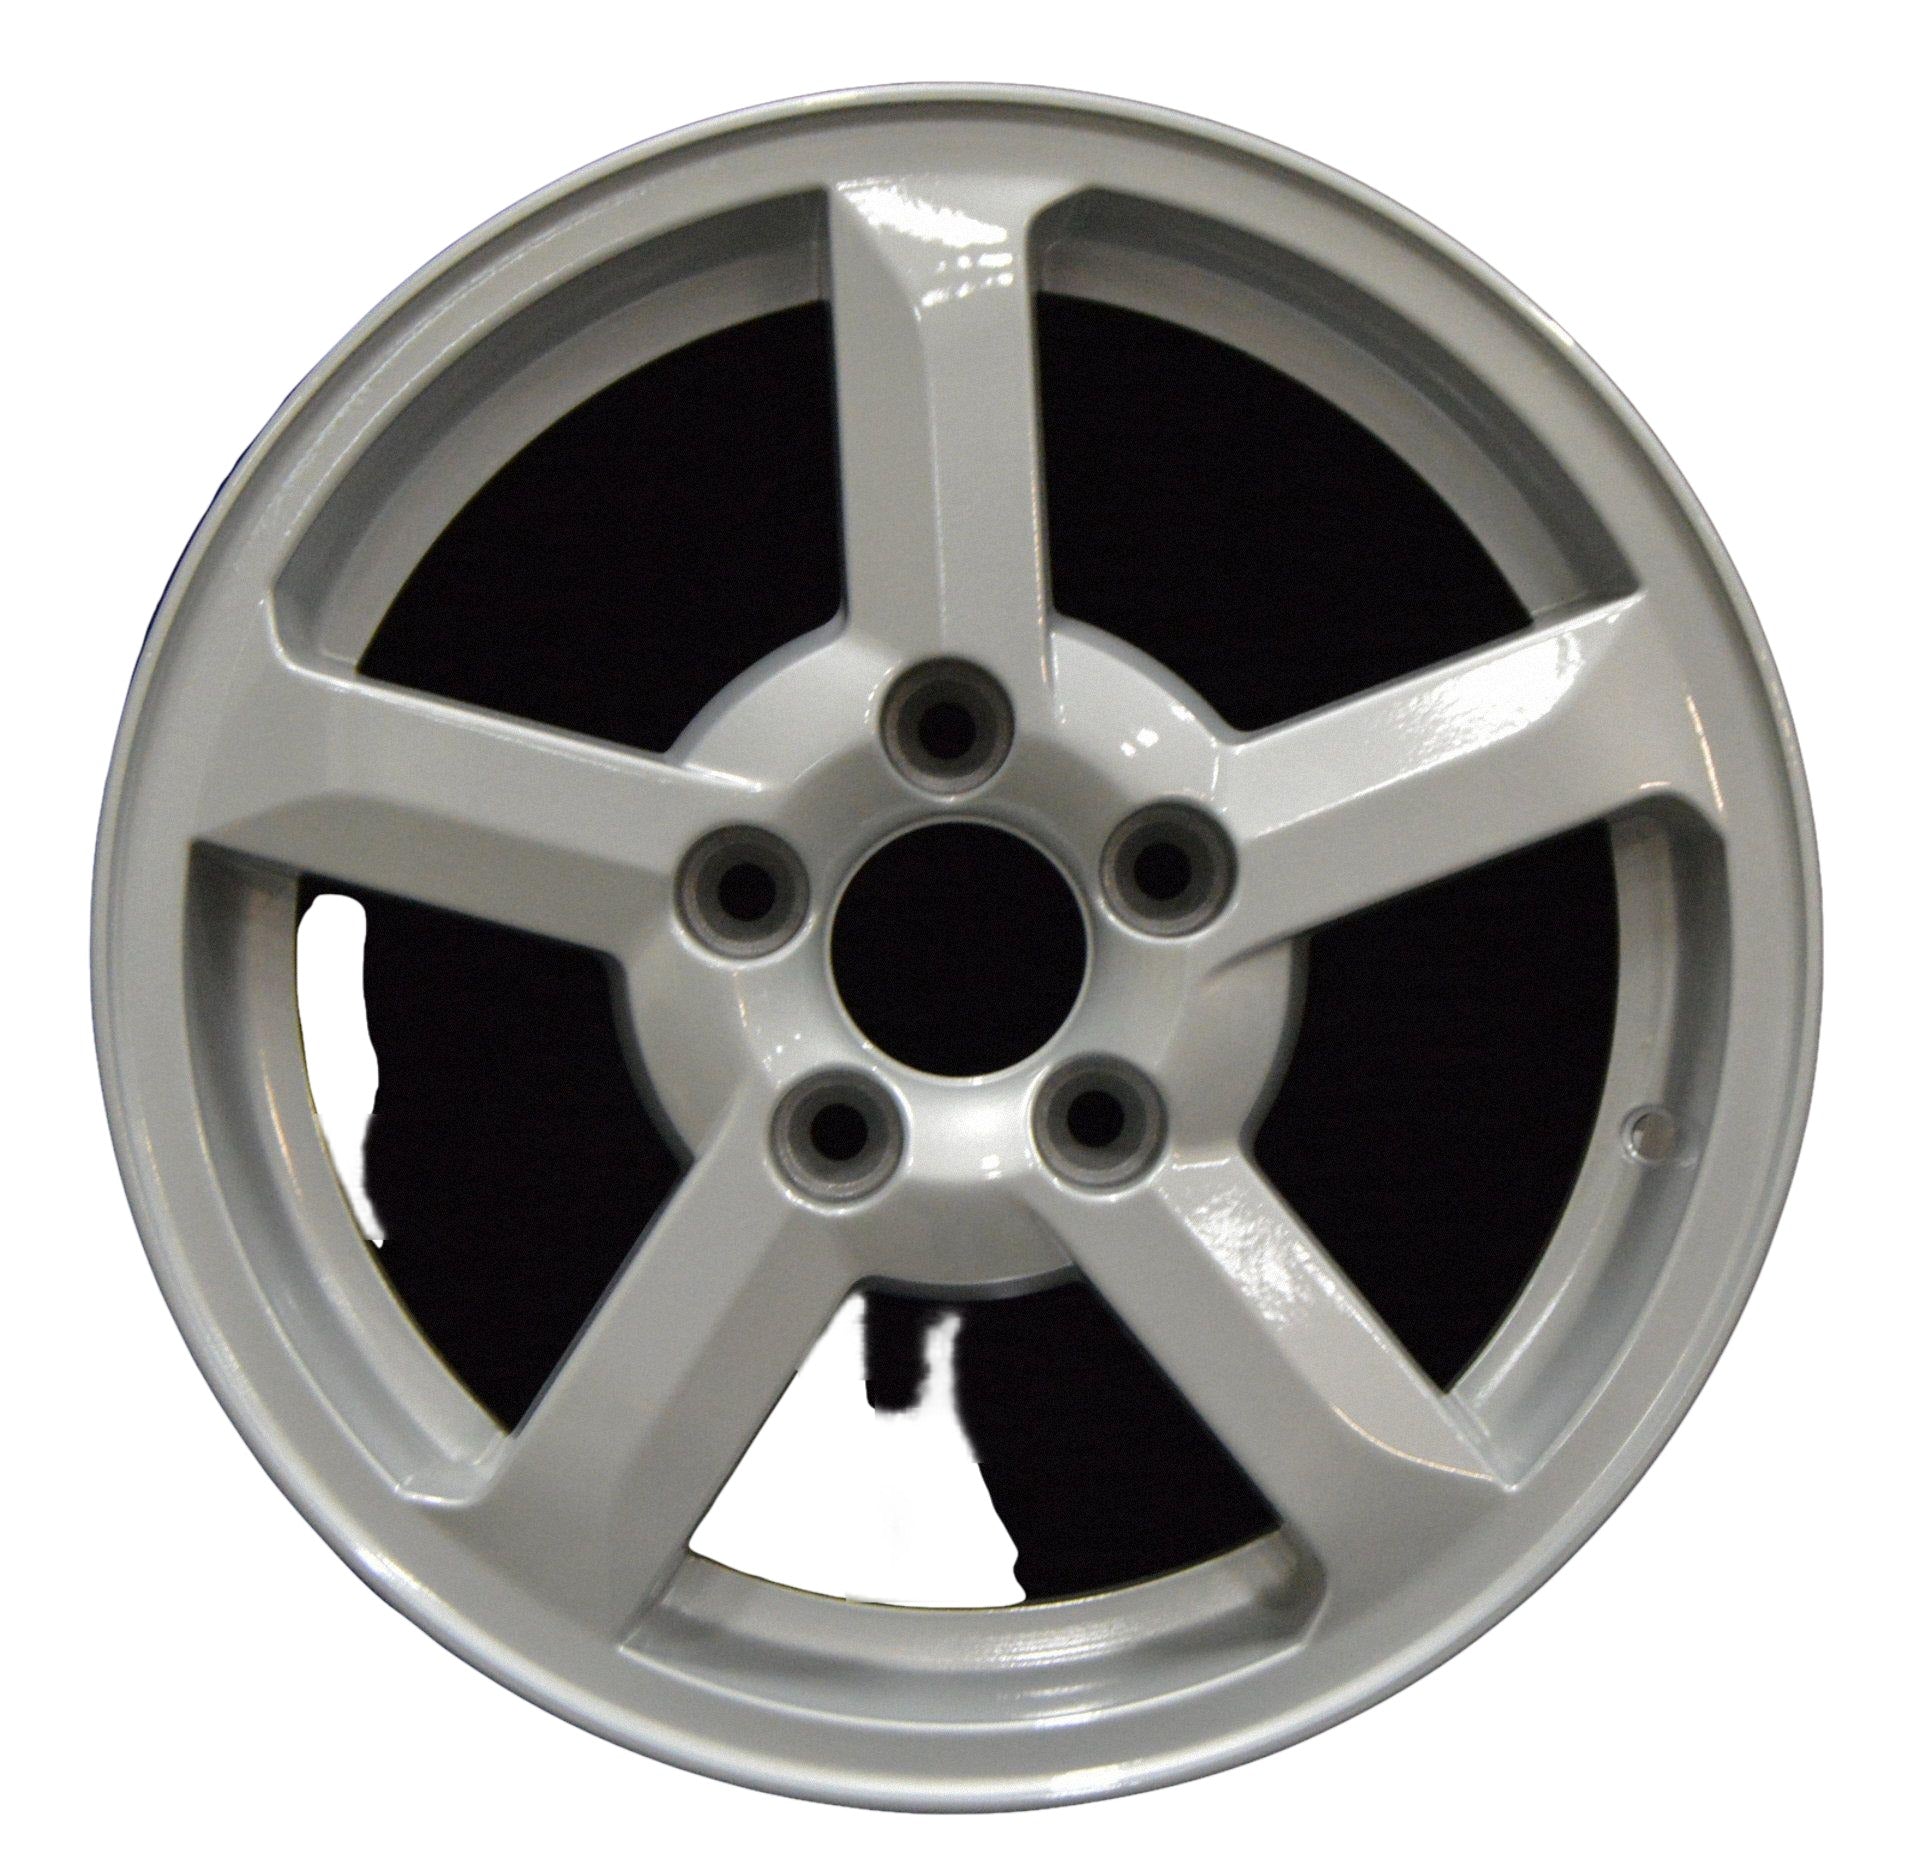 Volvo 70 Series  1998, 1999, 2000 Factory OEM Car Wheel Size 15x6.5 Alloy WAO.70219.PS04.FF